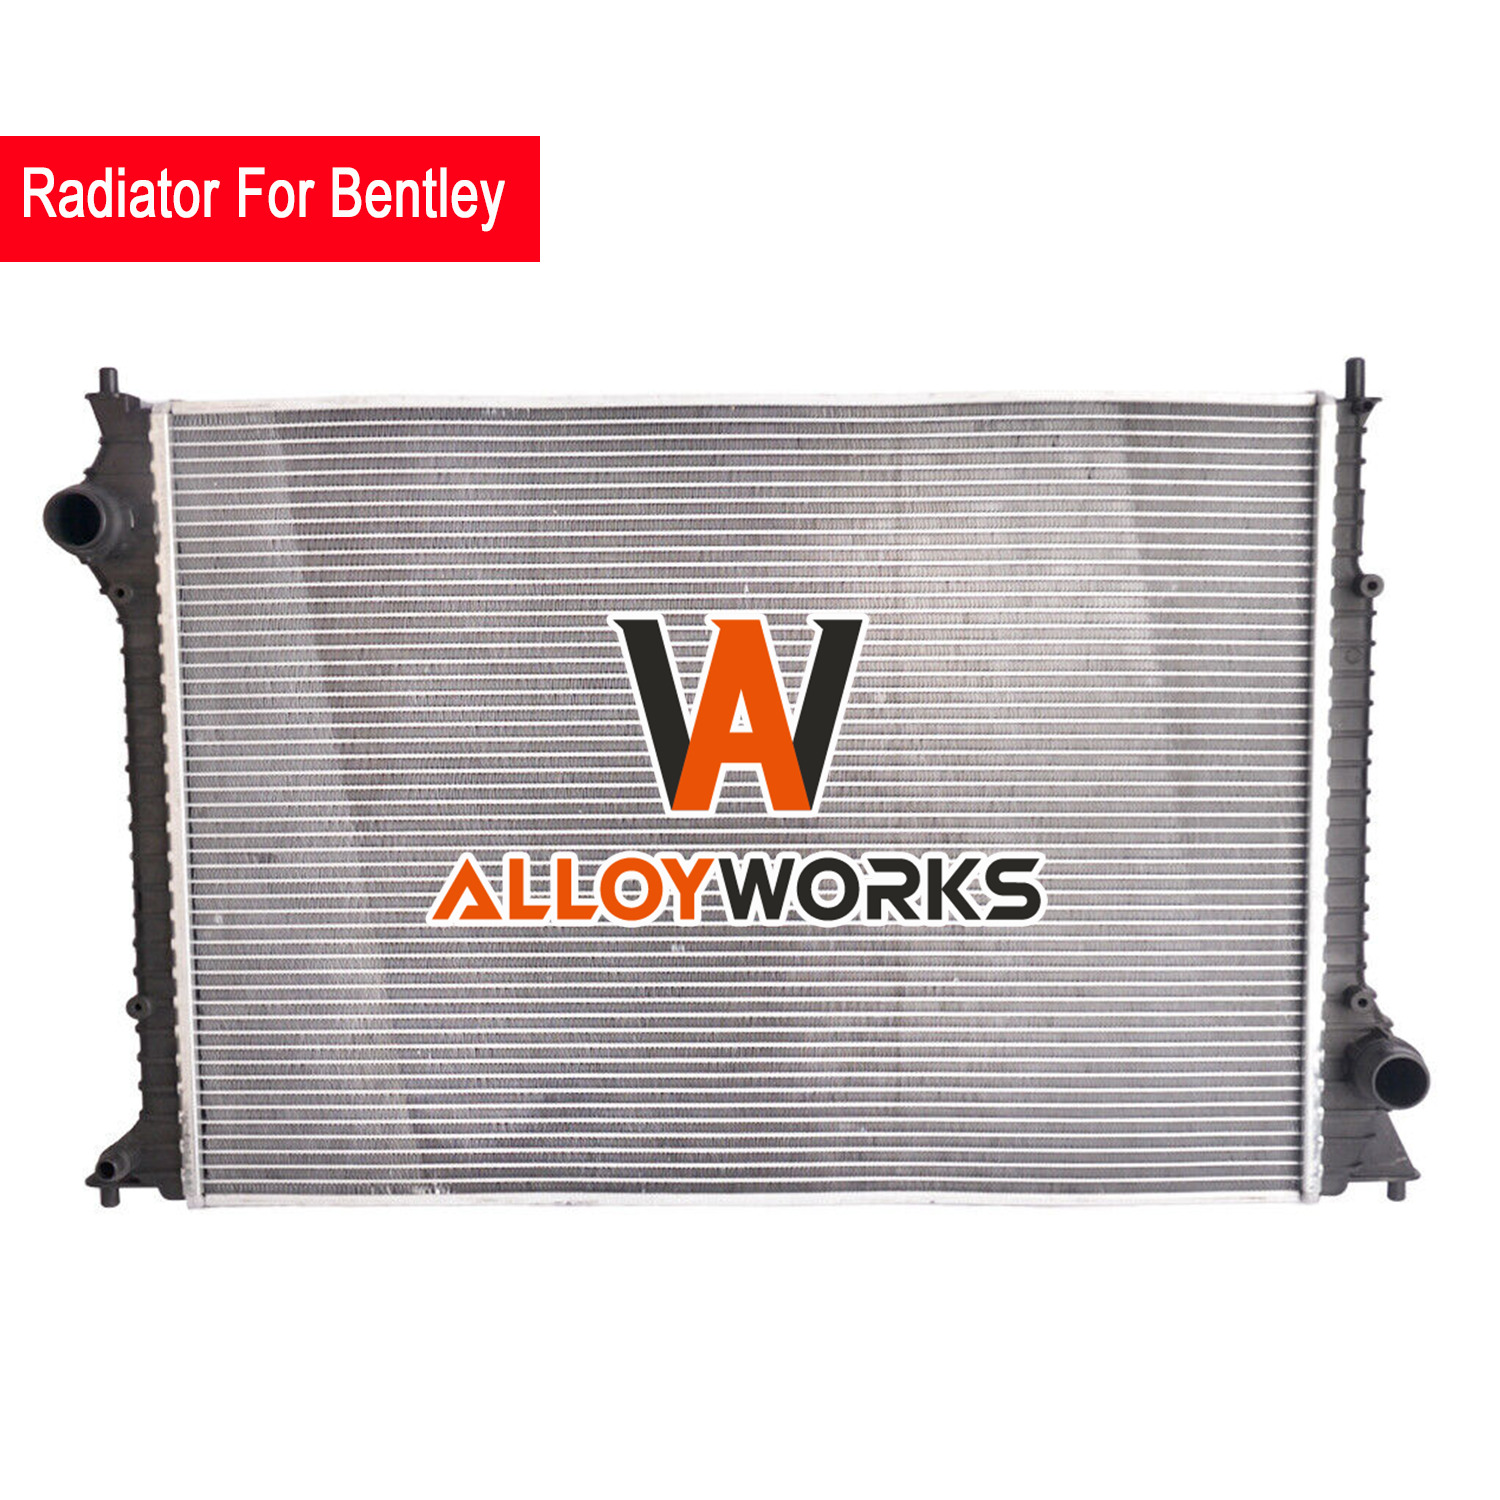 2 Row Coolant Radiator For 2004-2011 2008 Bentley Continental GT GTC Flying Spur